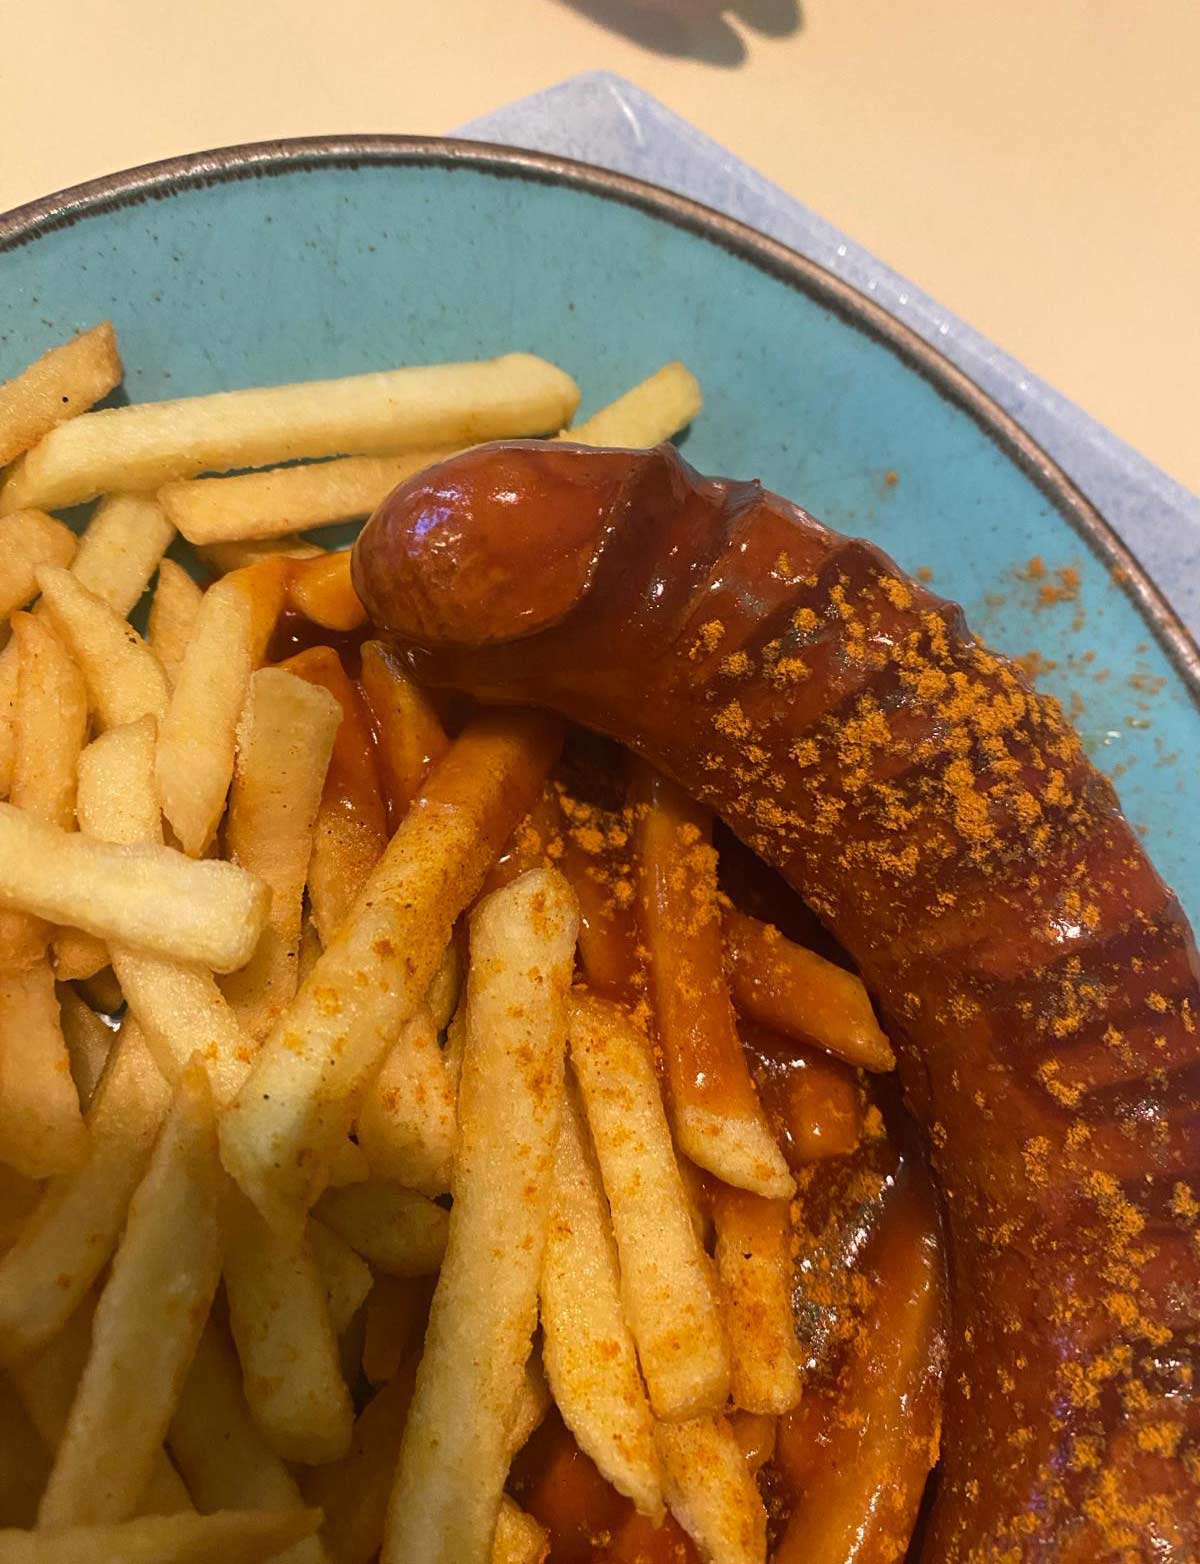 I ordered a Curry Wurst and got this. (It’s a sausage)